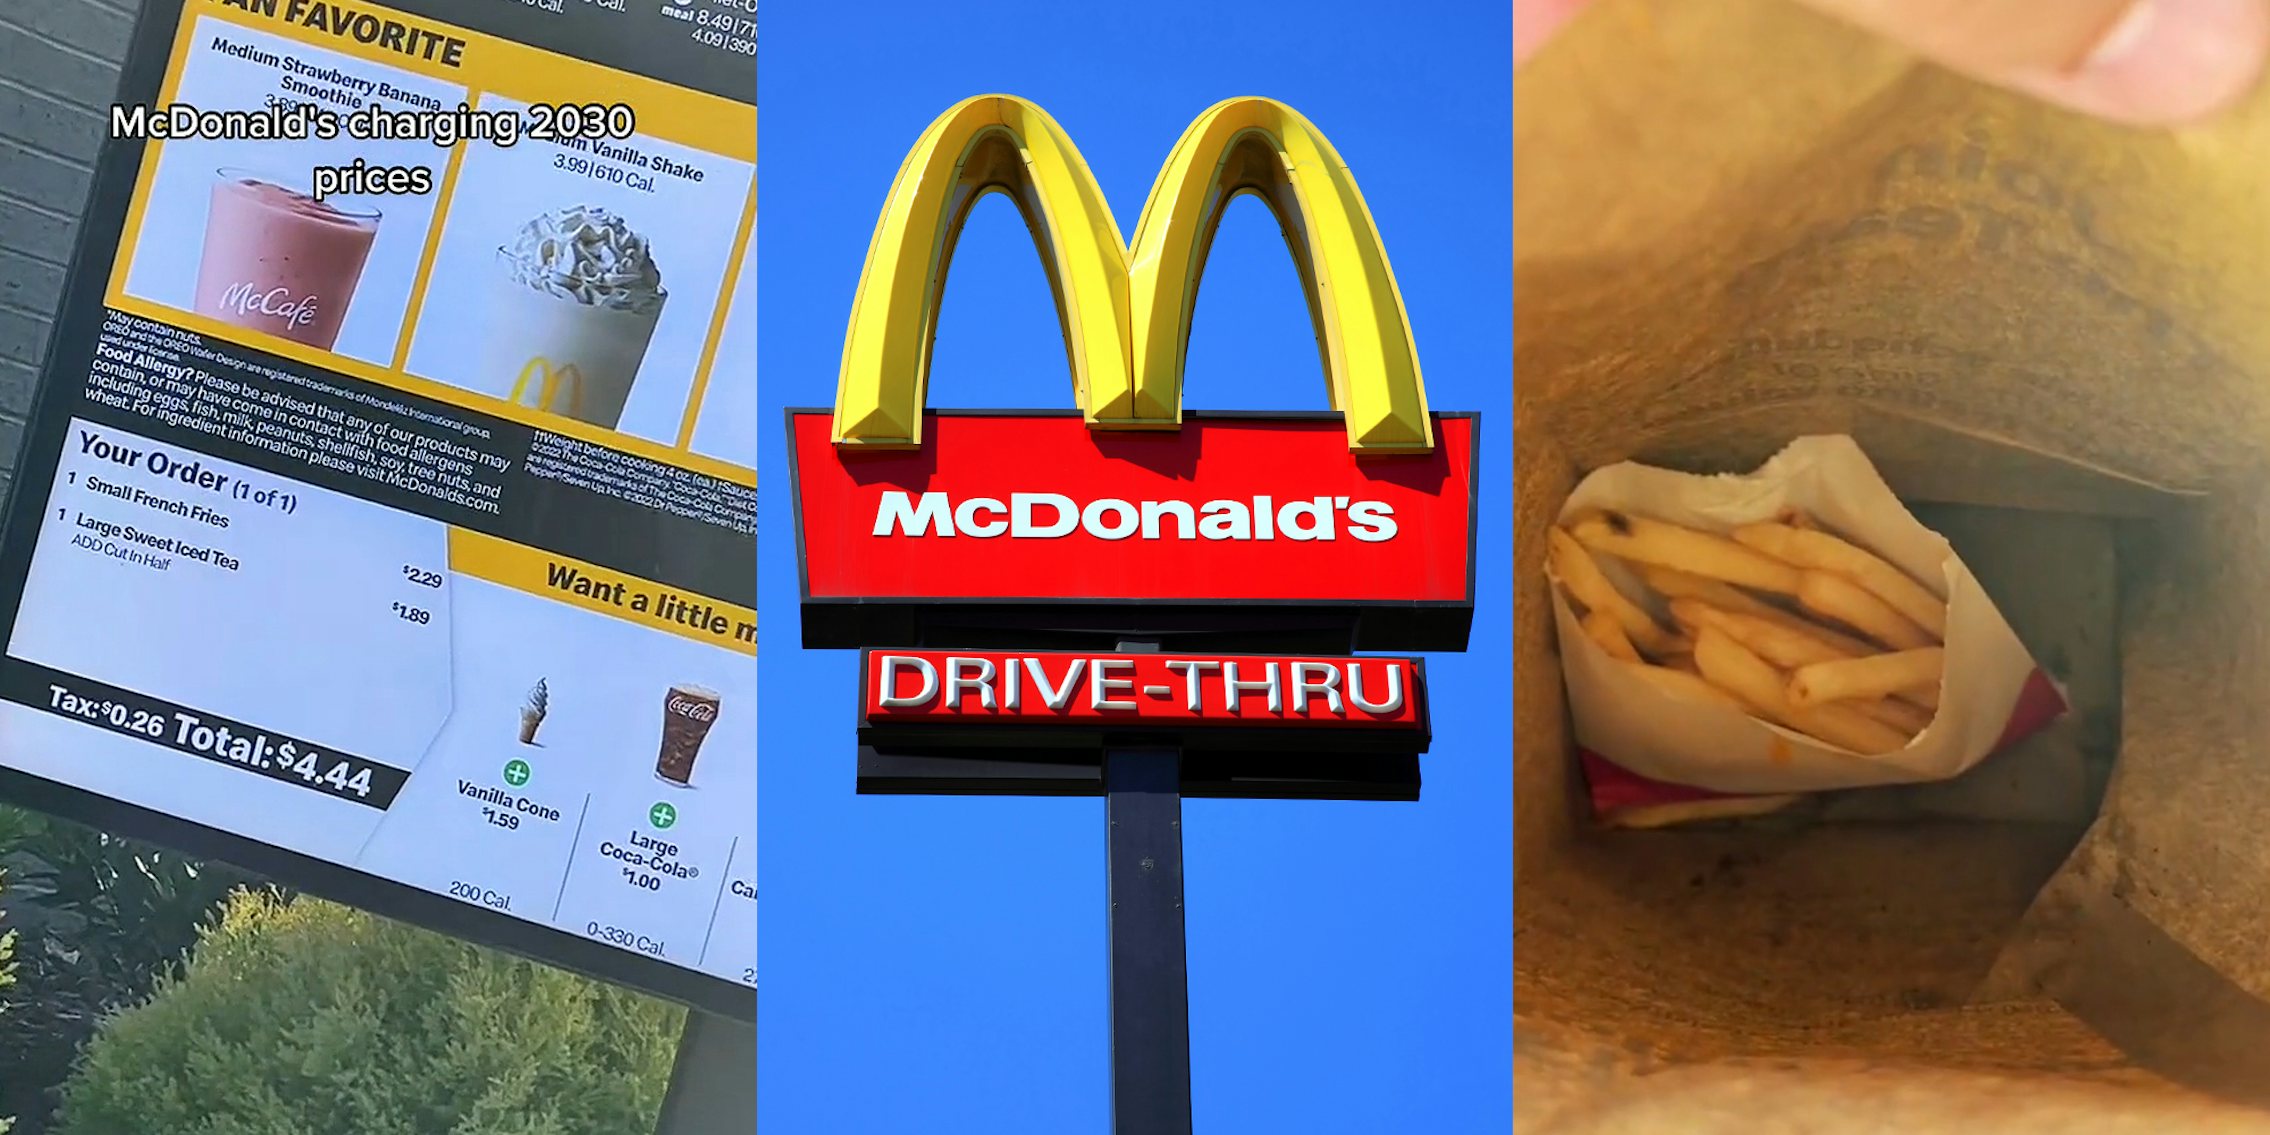 McDonald's menu with total '$4.44' for 1 small fries and 1 large sweet iced tea caption 'McDonald's charging 2030 prices' (l) McDonald's sign with blue sky (c) McDonald's fries in paper bag (r)